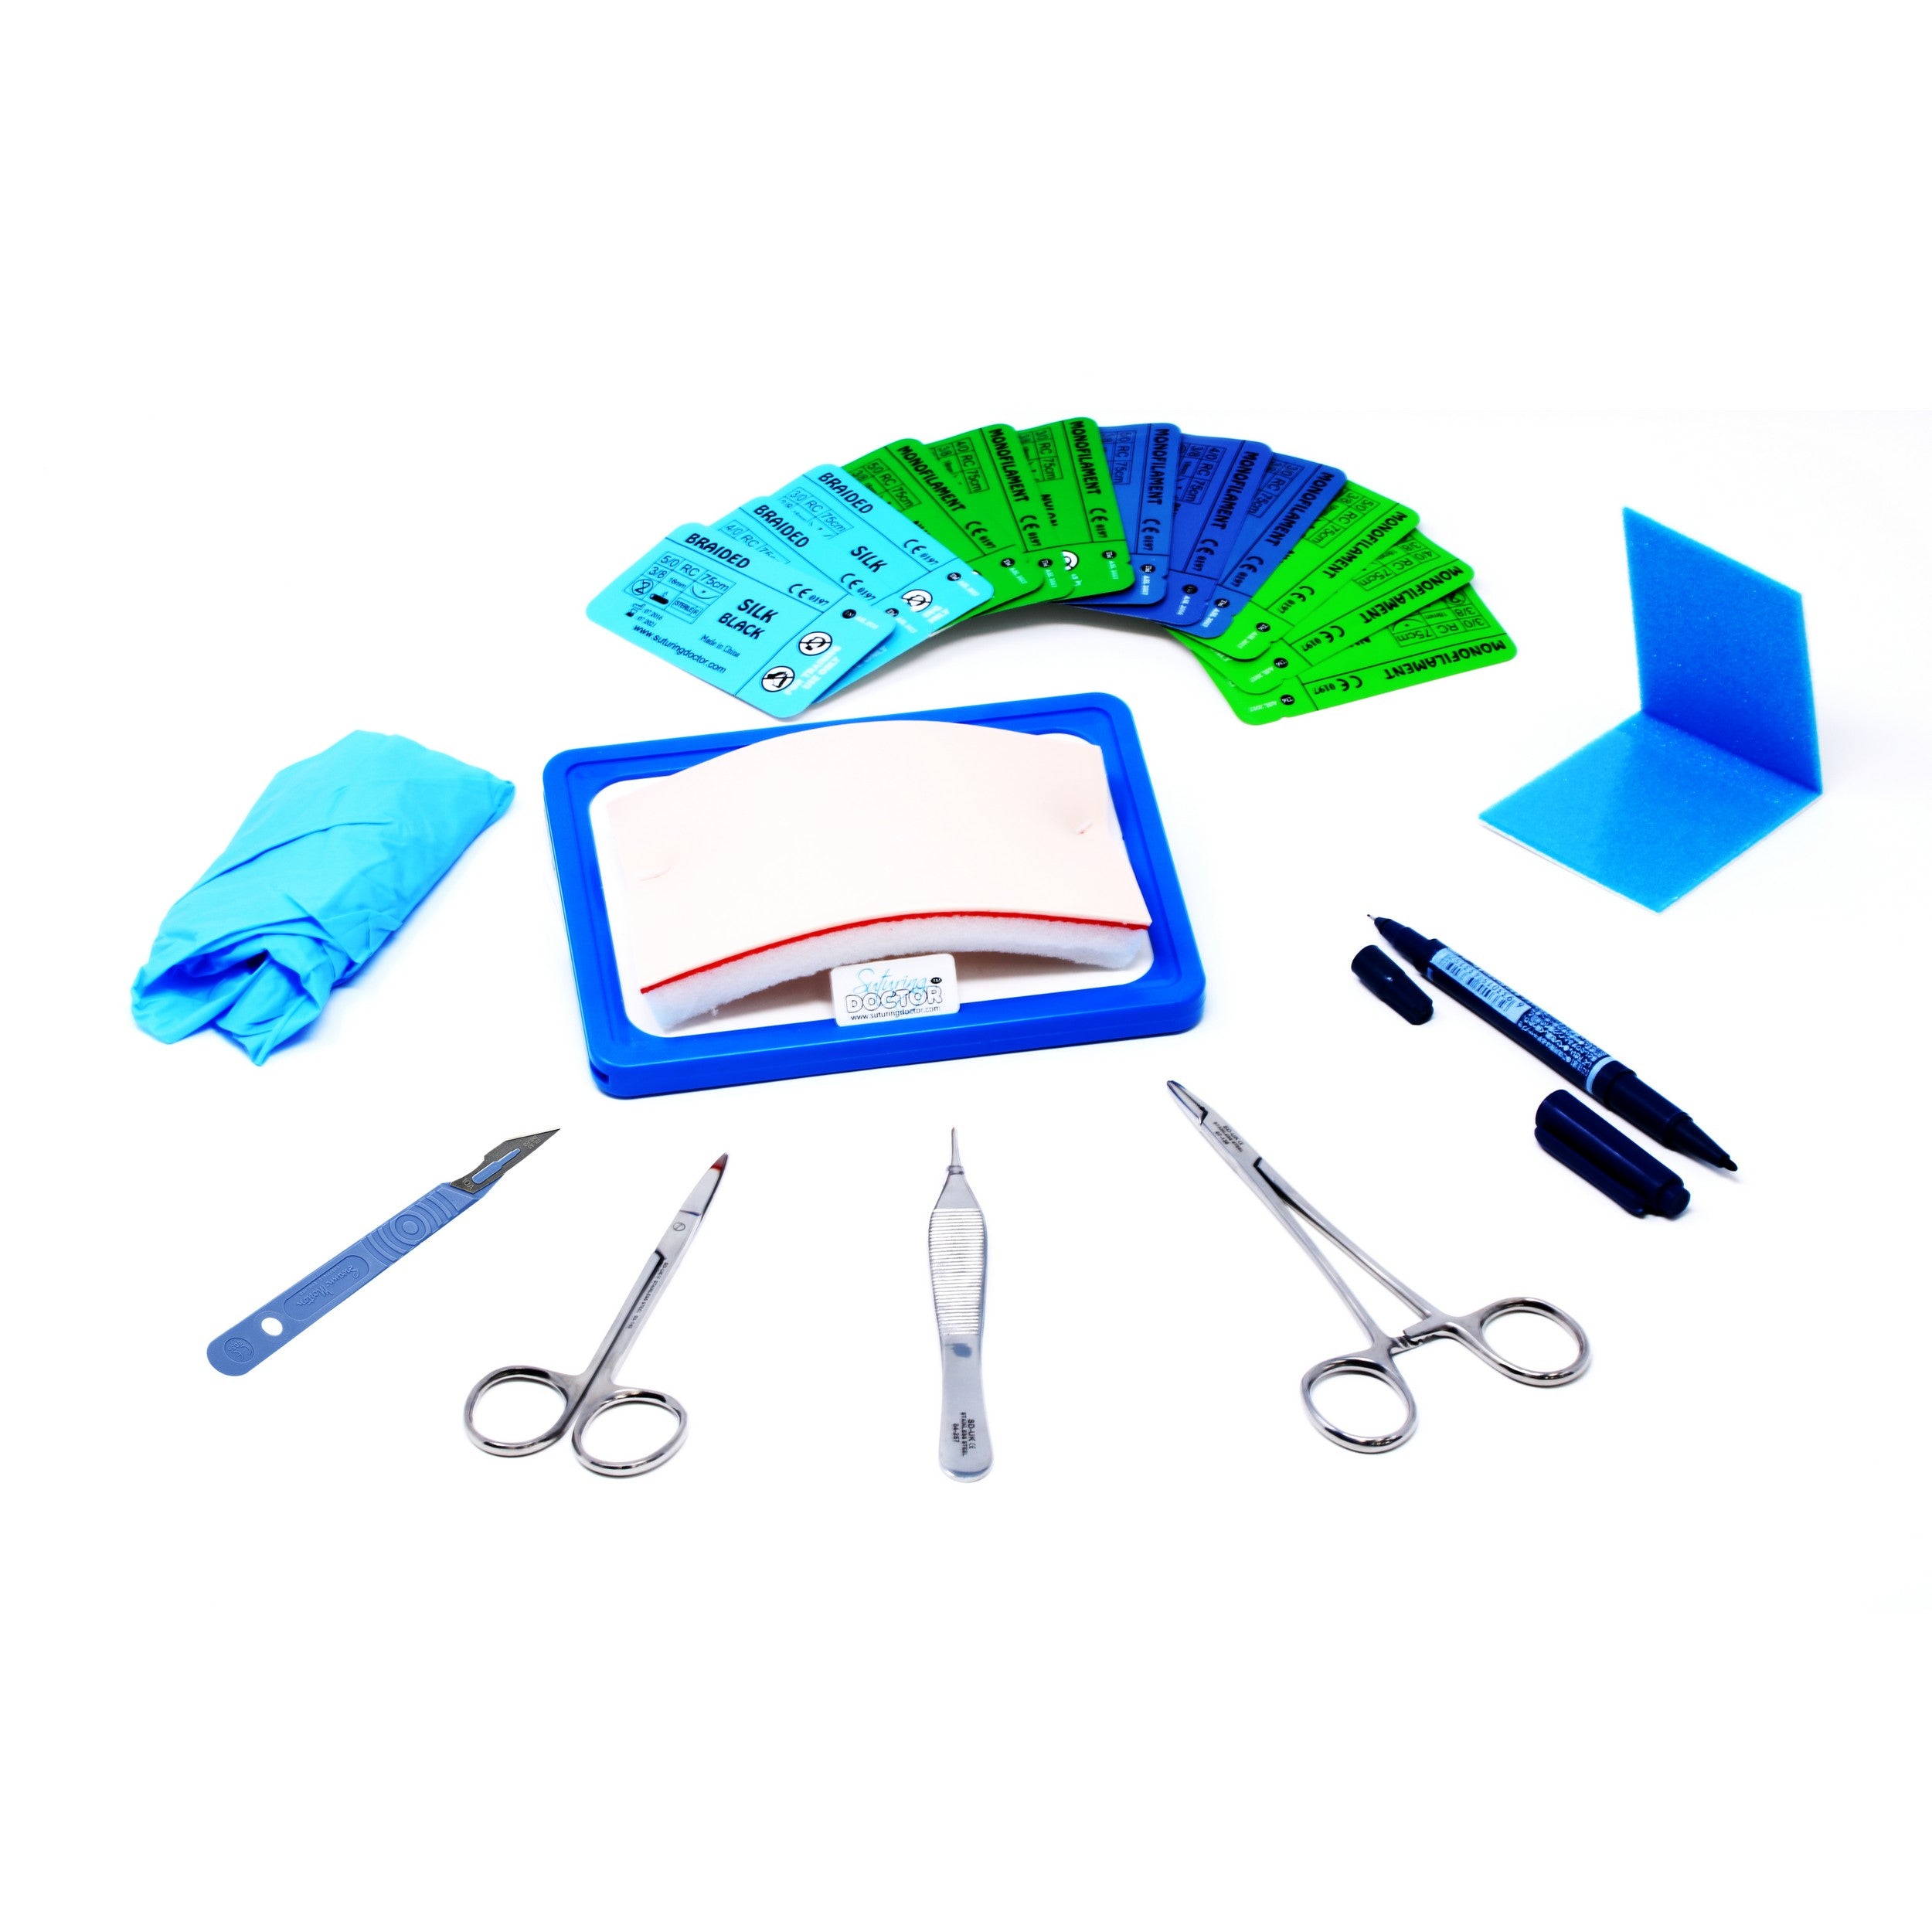 Medical Creations Suture Practice Kit with Suturing Video Series by  Board-Certified Surgeon and Ebook Training Guide - Silicone Suturing Pad  with Tool